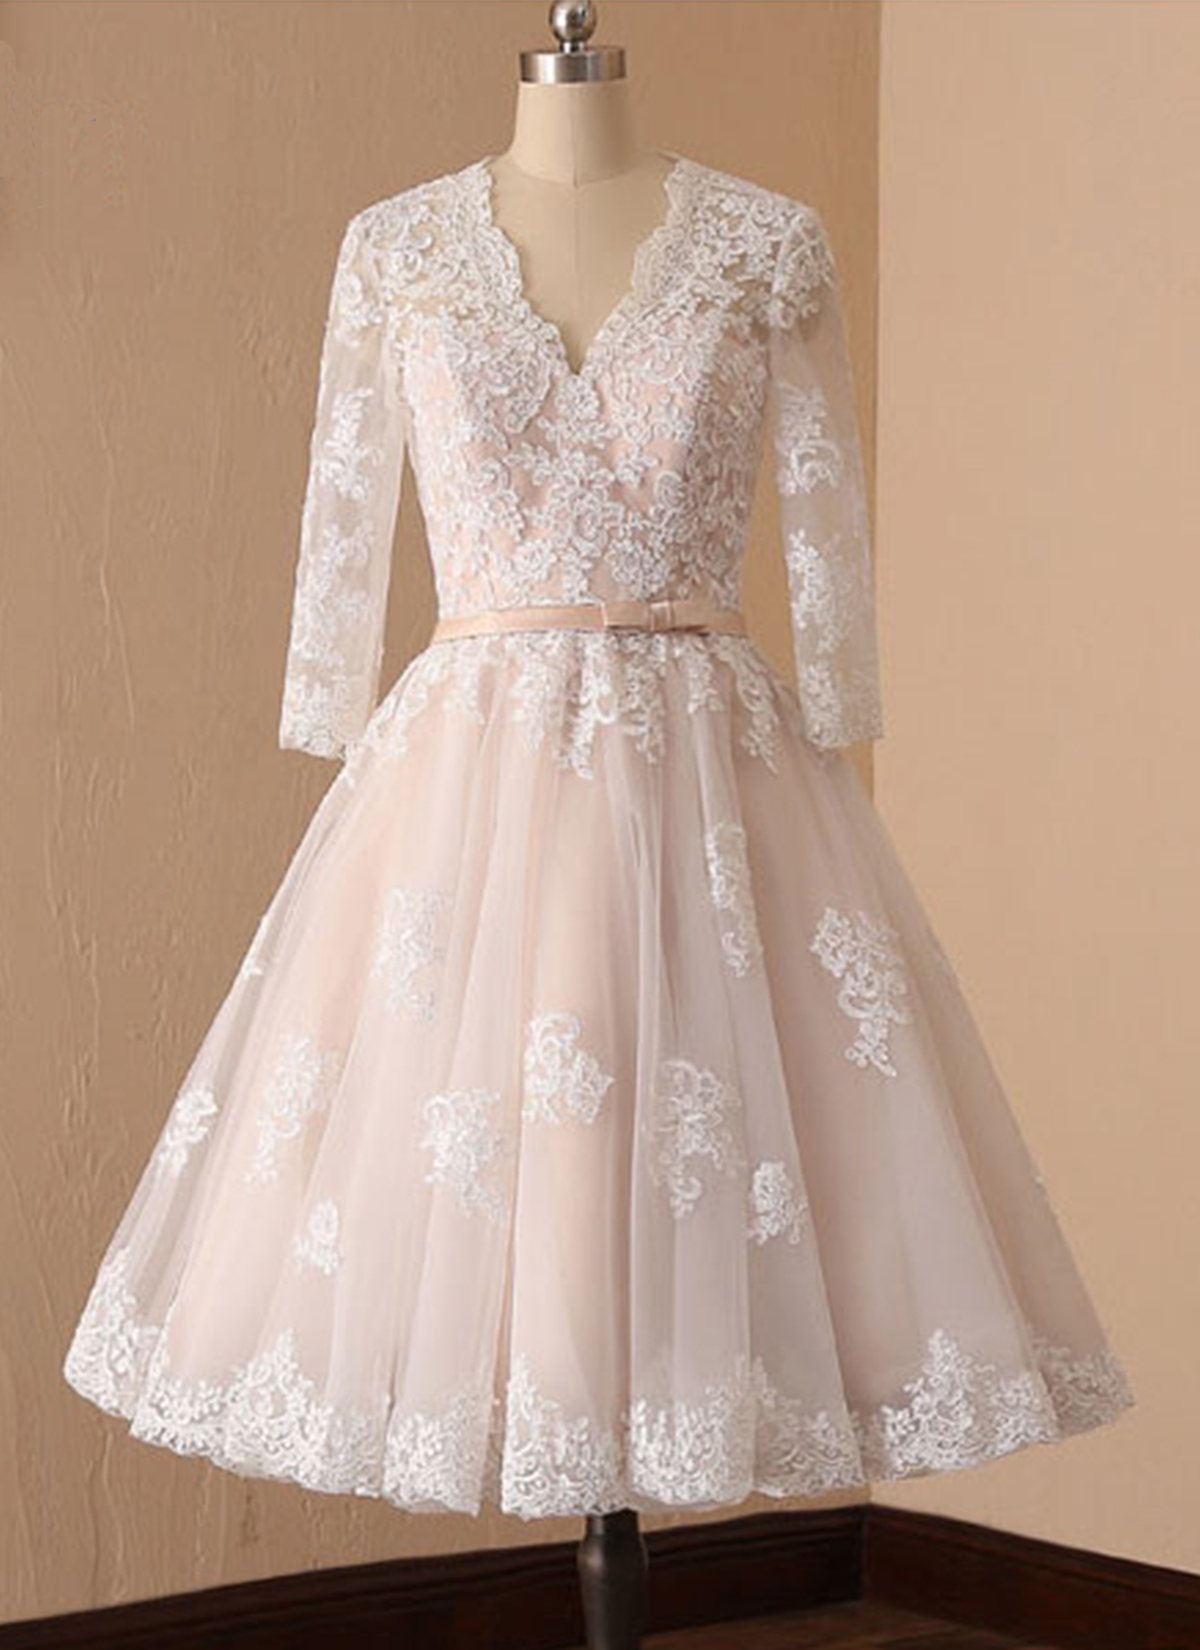 Creamy Tulle Lace Short Prom Dress, Bridesmaid Dress With Sleeves